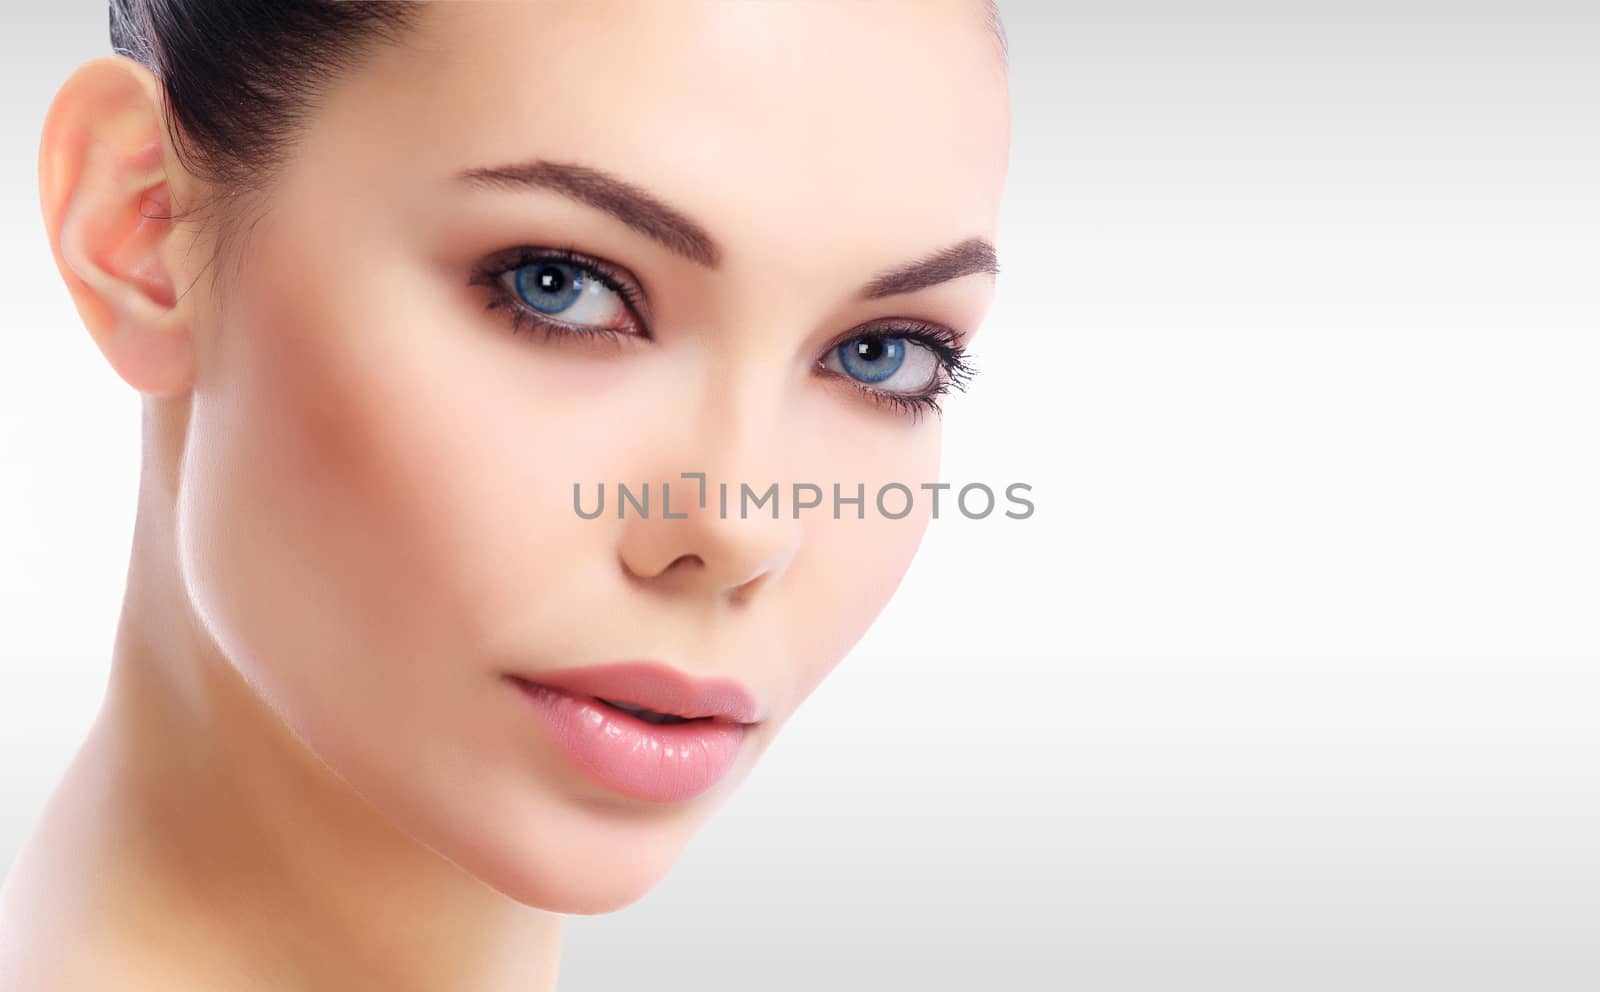 Pretty woman's face against a grey background with copyspace